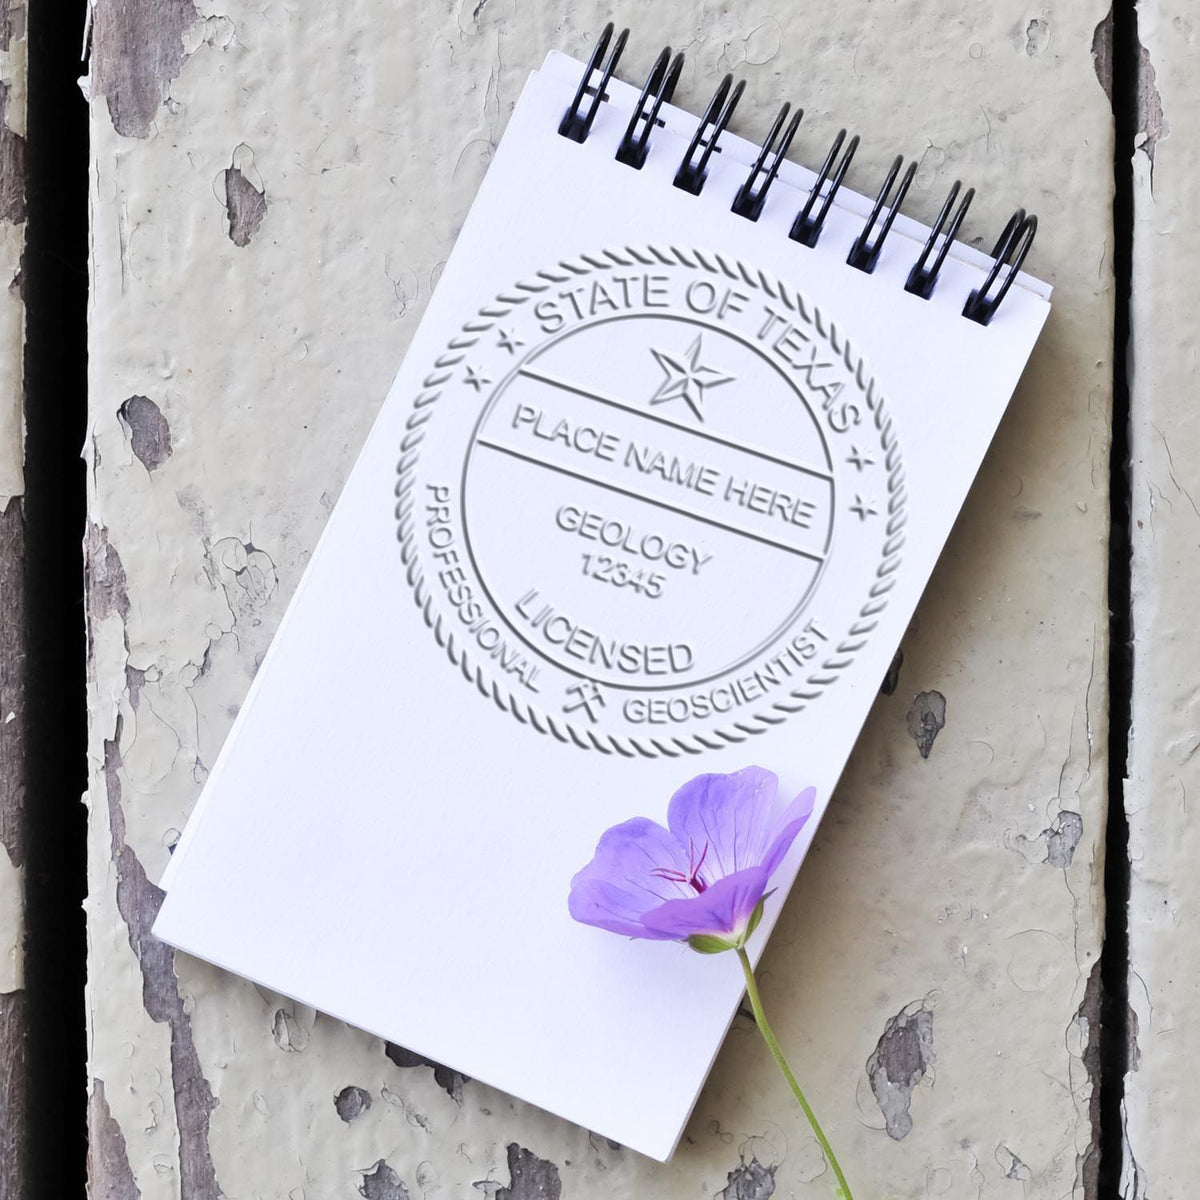 A stamped imprint of the State of Texas Extended Long Reach Geologist Seal in this stylish lifestyle photo, setting the tone for a unique and personalized product.